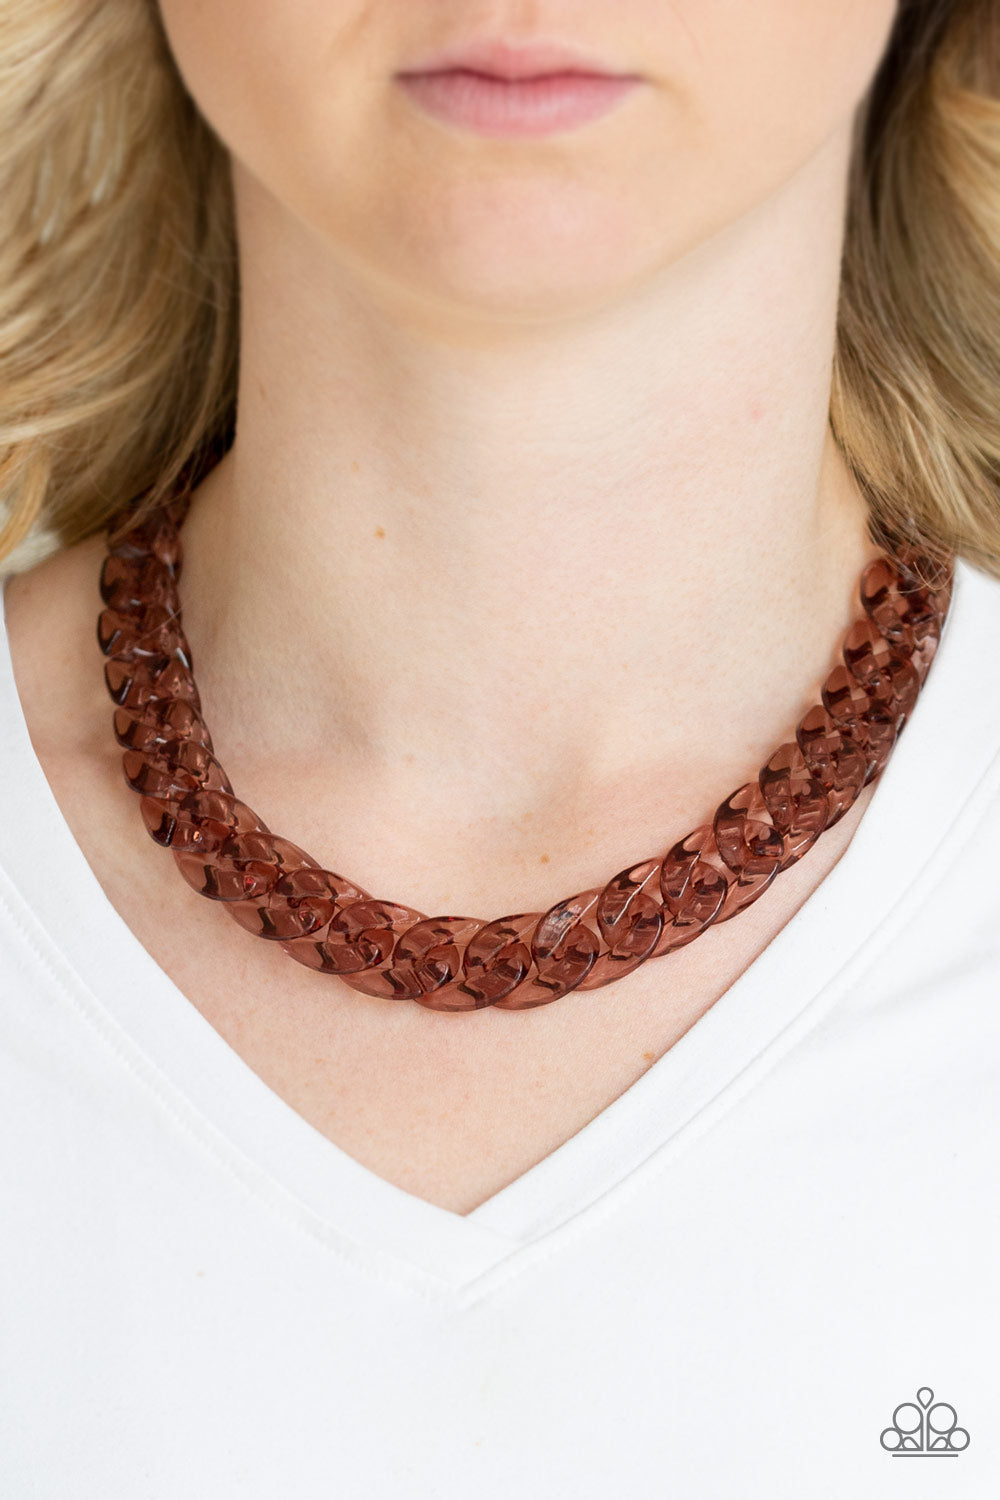 Paparazzi necklace - Put It On Ice - Copper